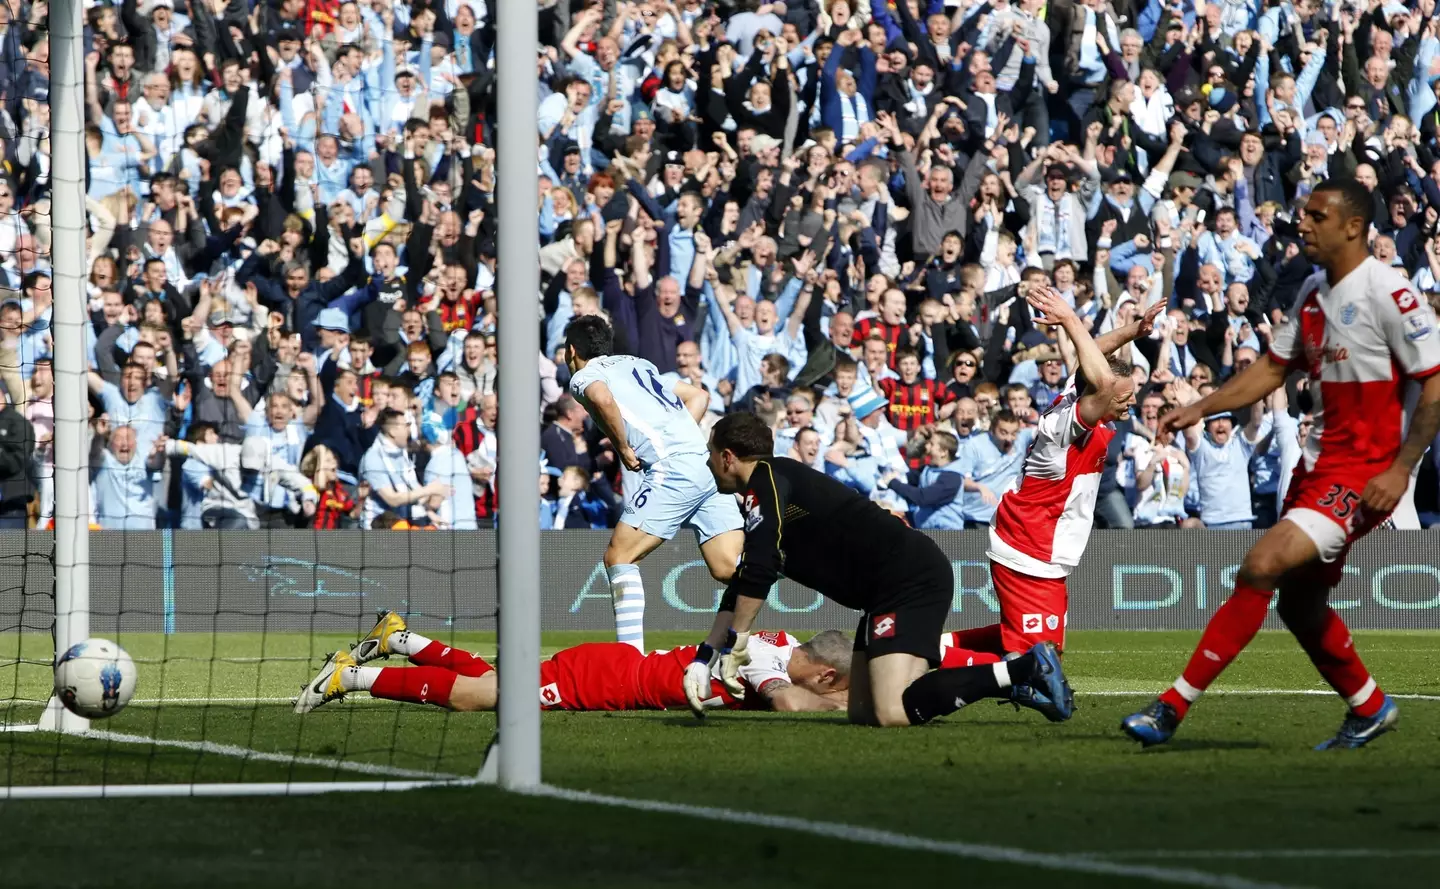 Rooney questioned Kenny's goalkeeping in Manchester City's famous win over QPR in 2012 (Image: PA)